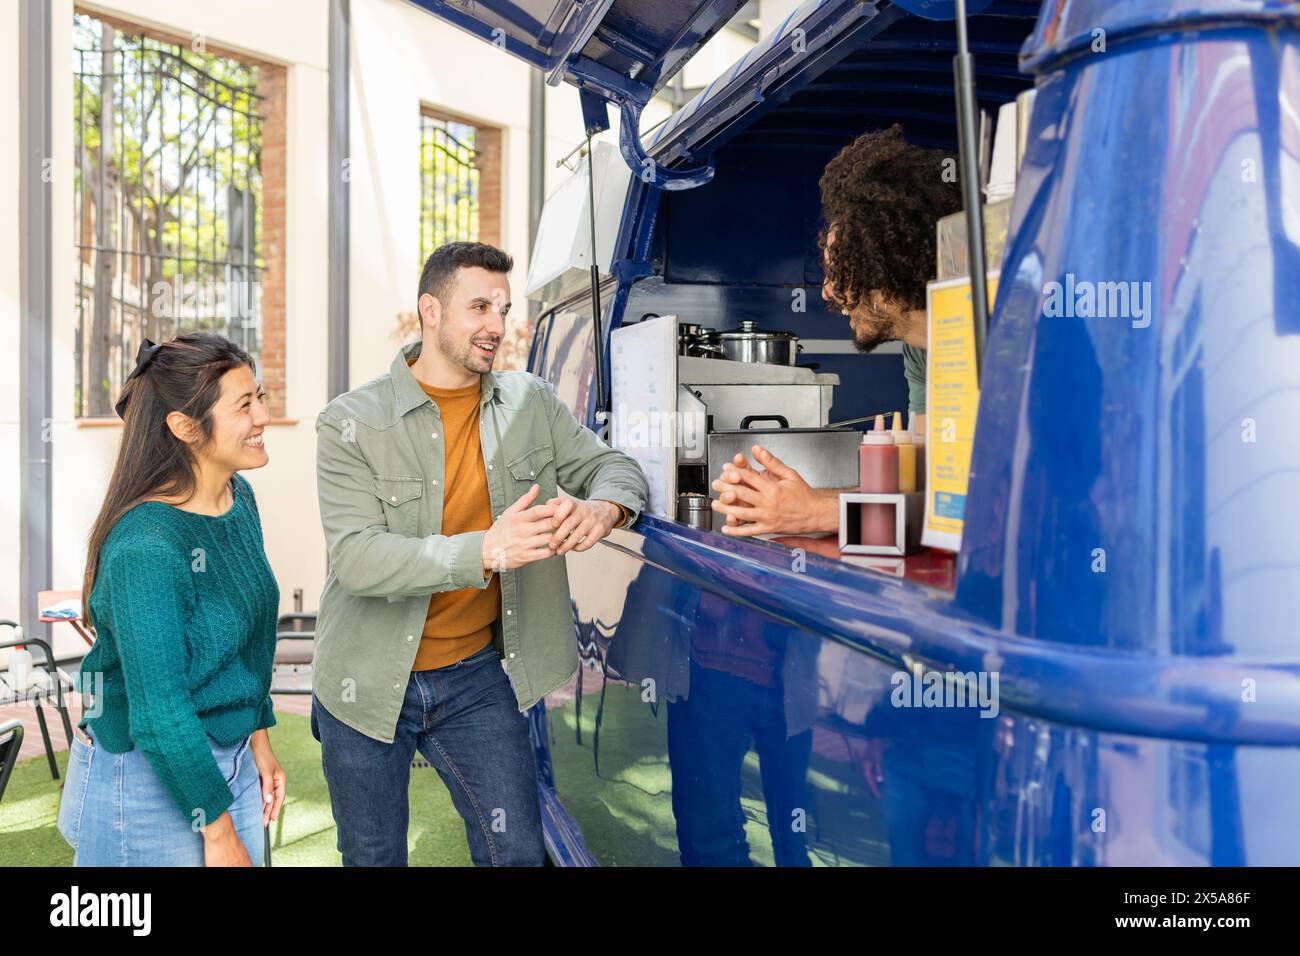 Two friends share a cheerful moment while ordering food from a vendor at a vibrant blue food truck Stock Photo